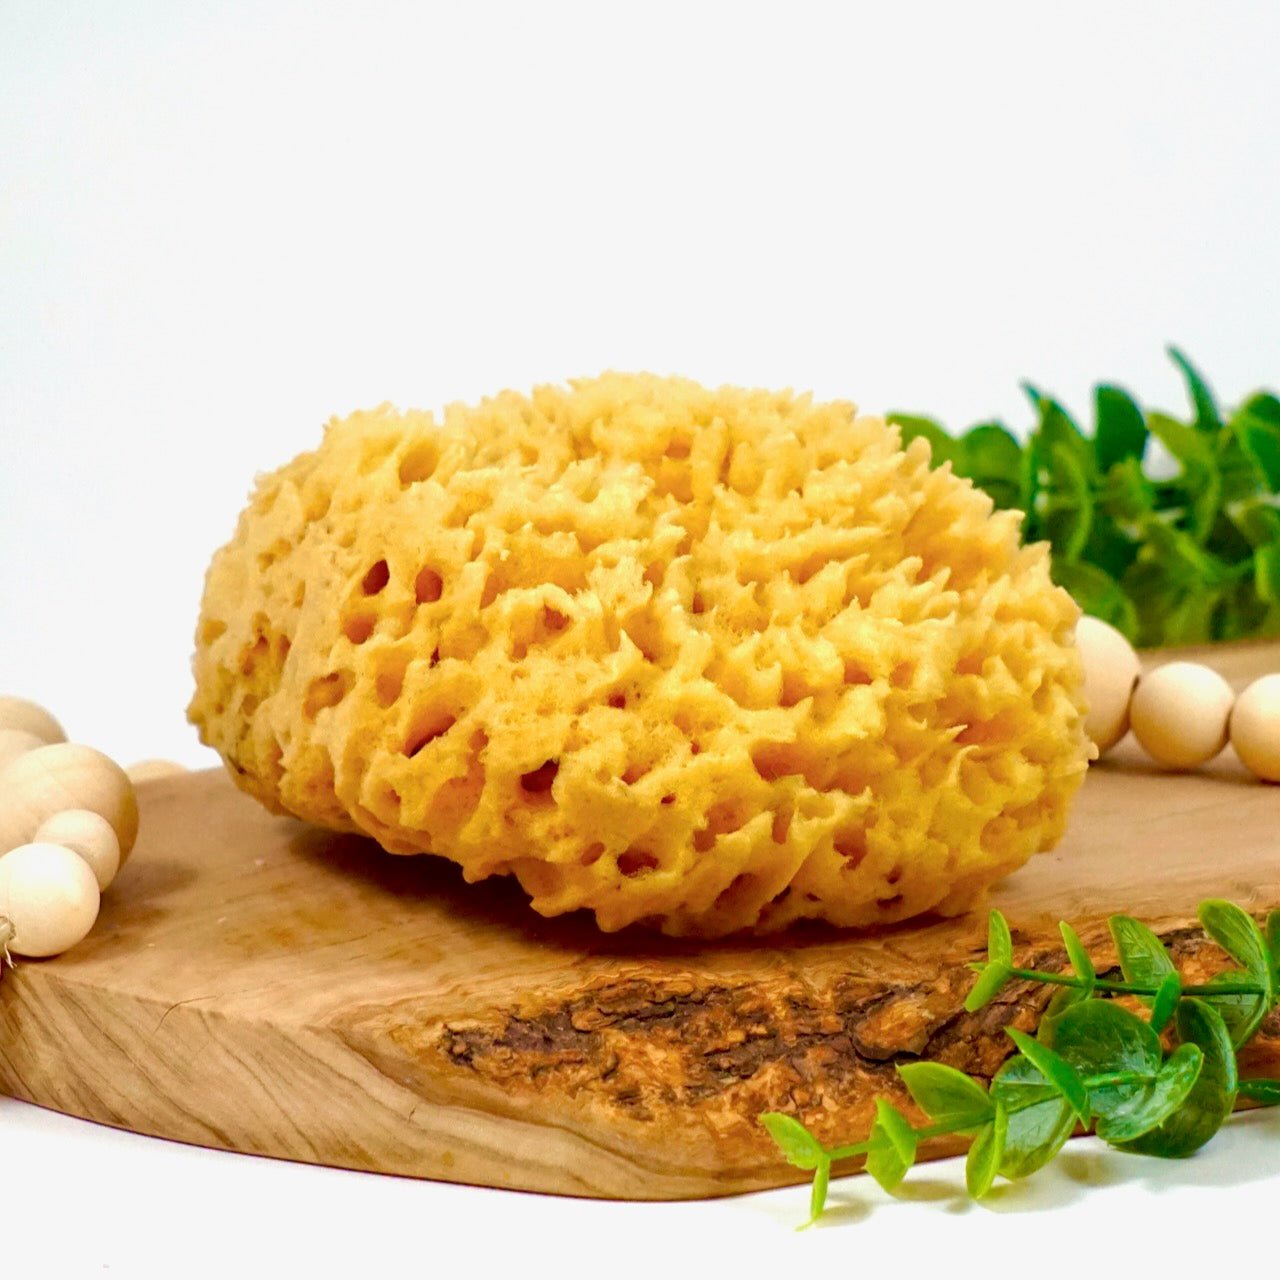 Sea Sponge, Sustainably Harvested - Simply Bliss